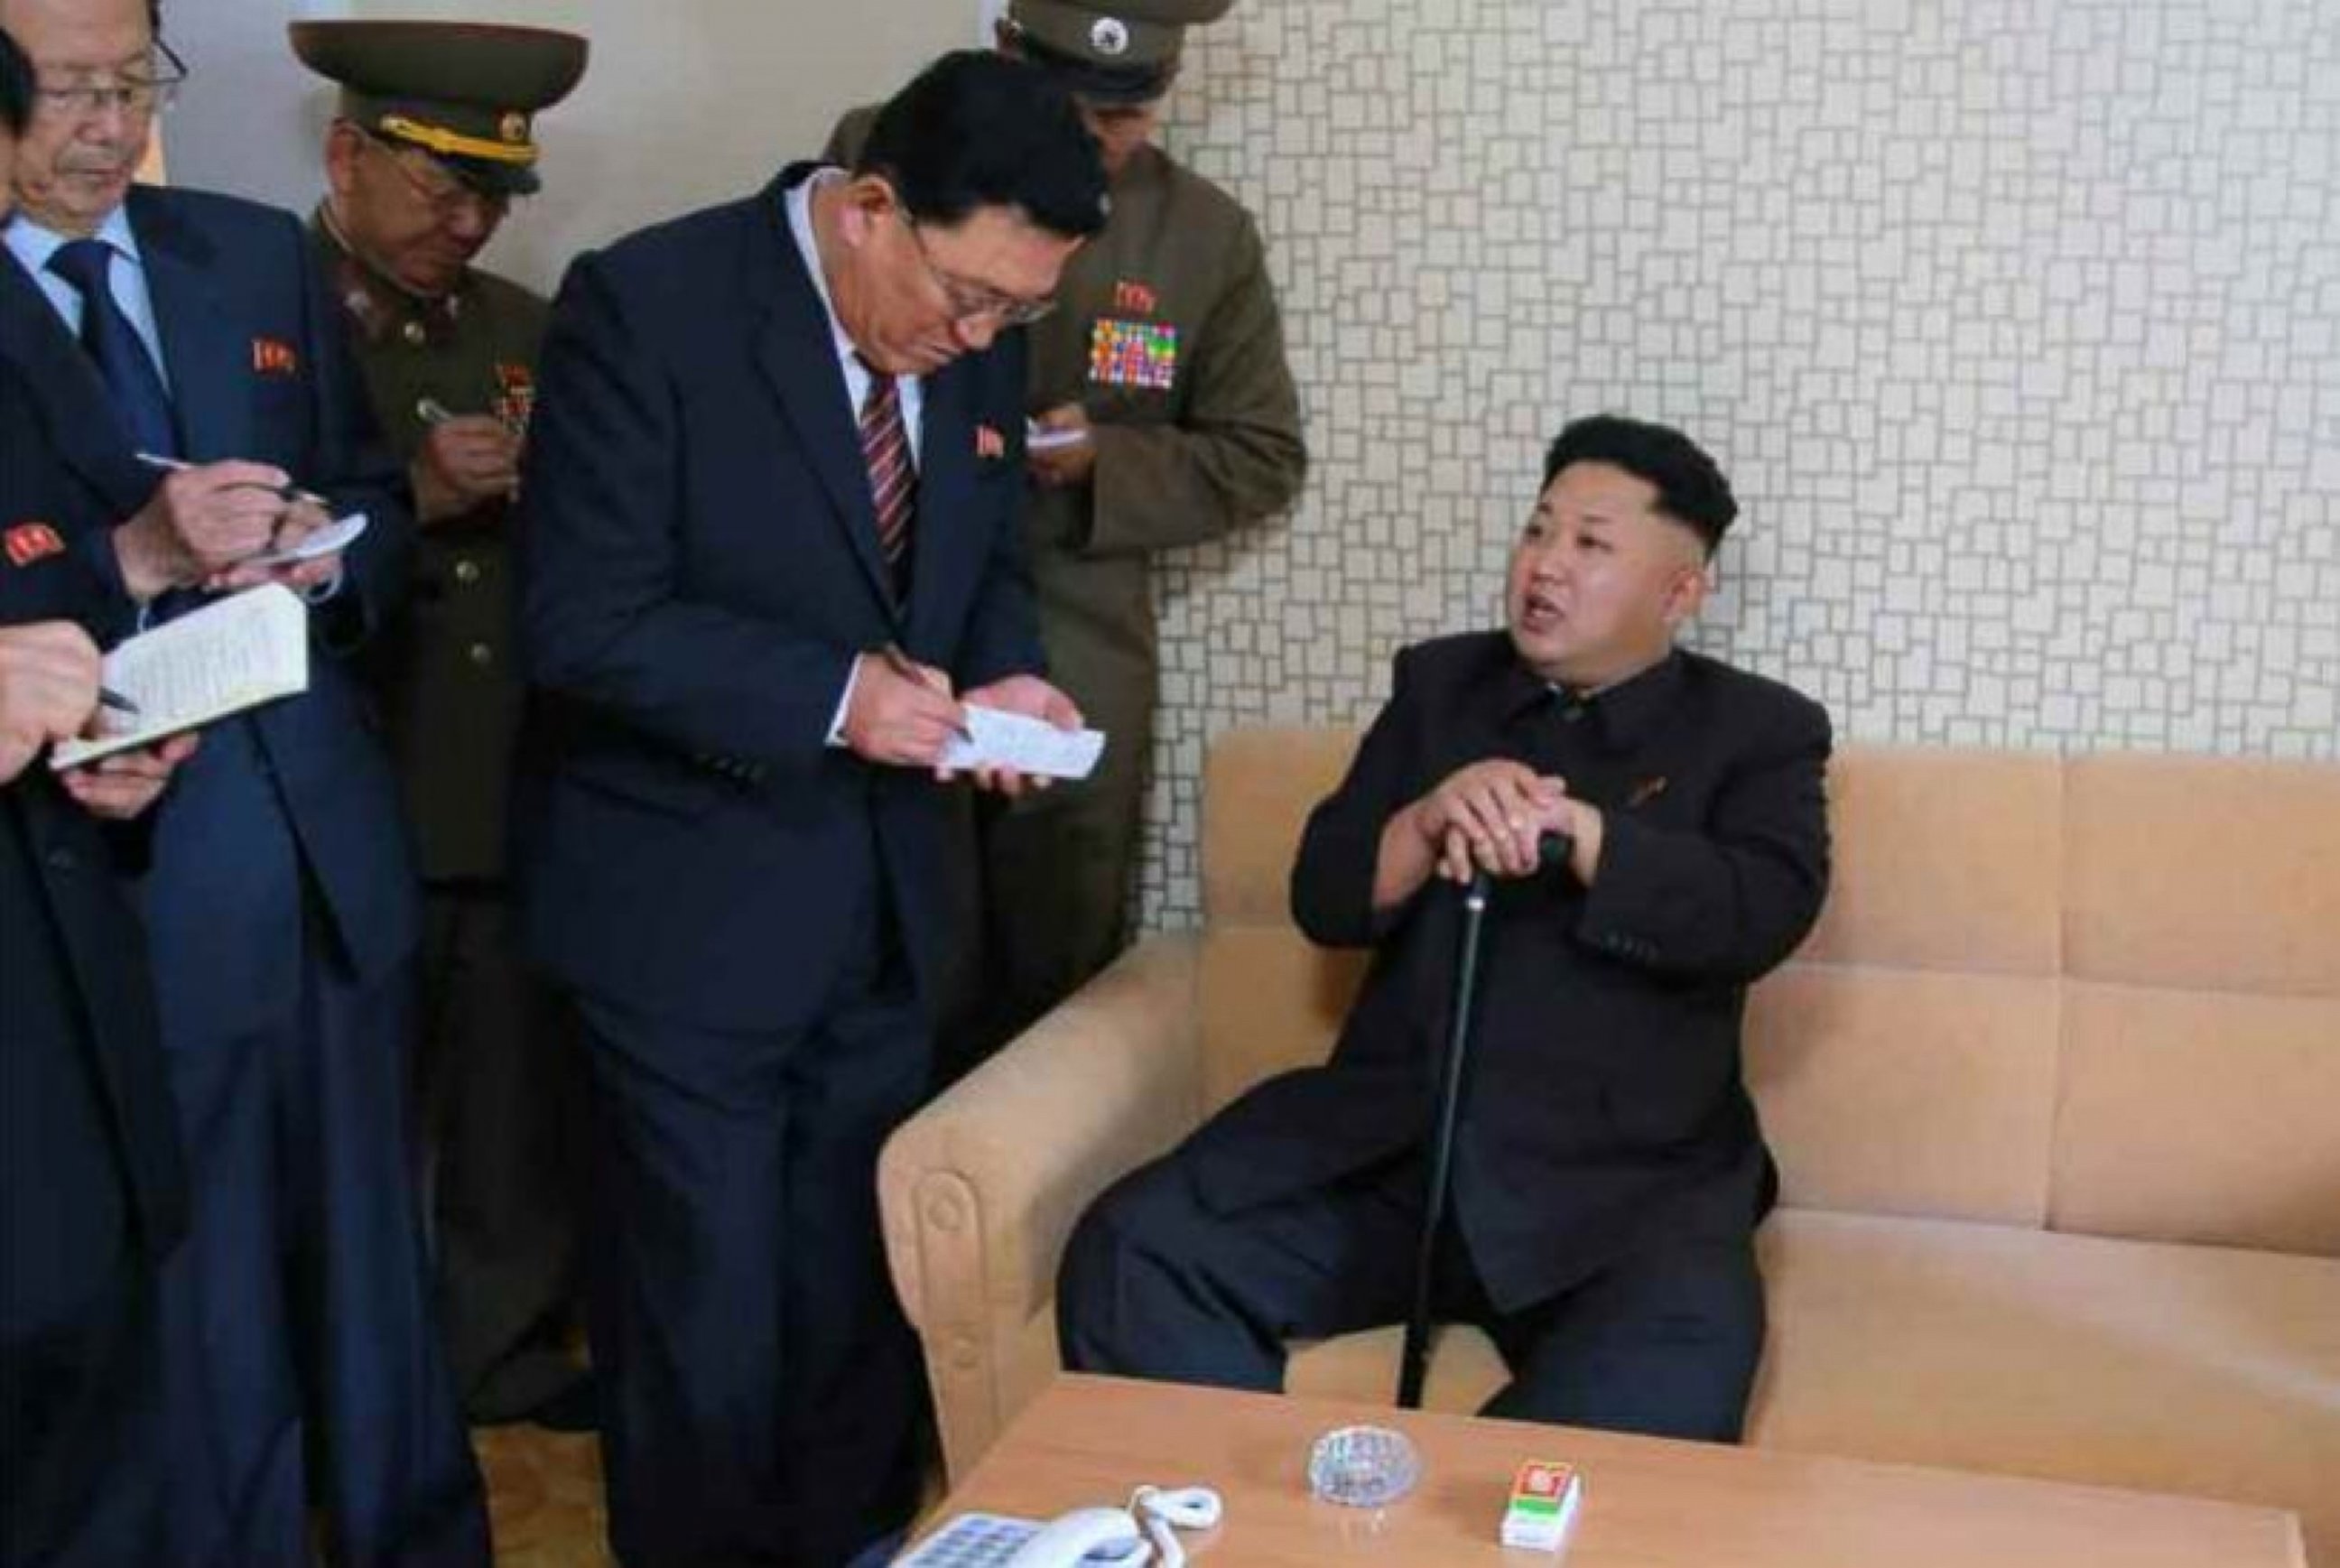 PHOTO: A photo released by North Korea's official news agency on Oct 14, 2014 shows North Korean leader Kim Jong-un using a cane during his first public appearance in weeks.